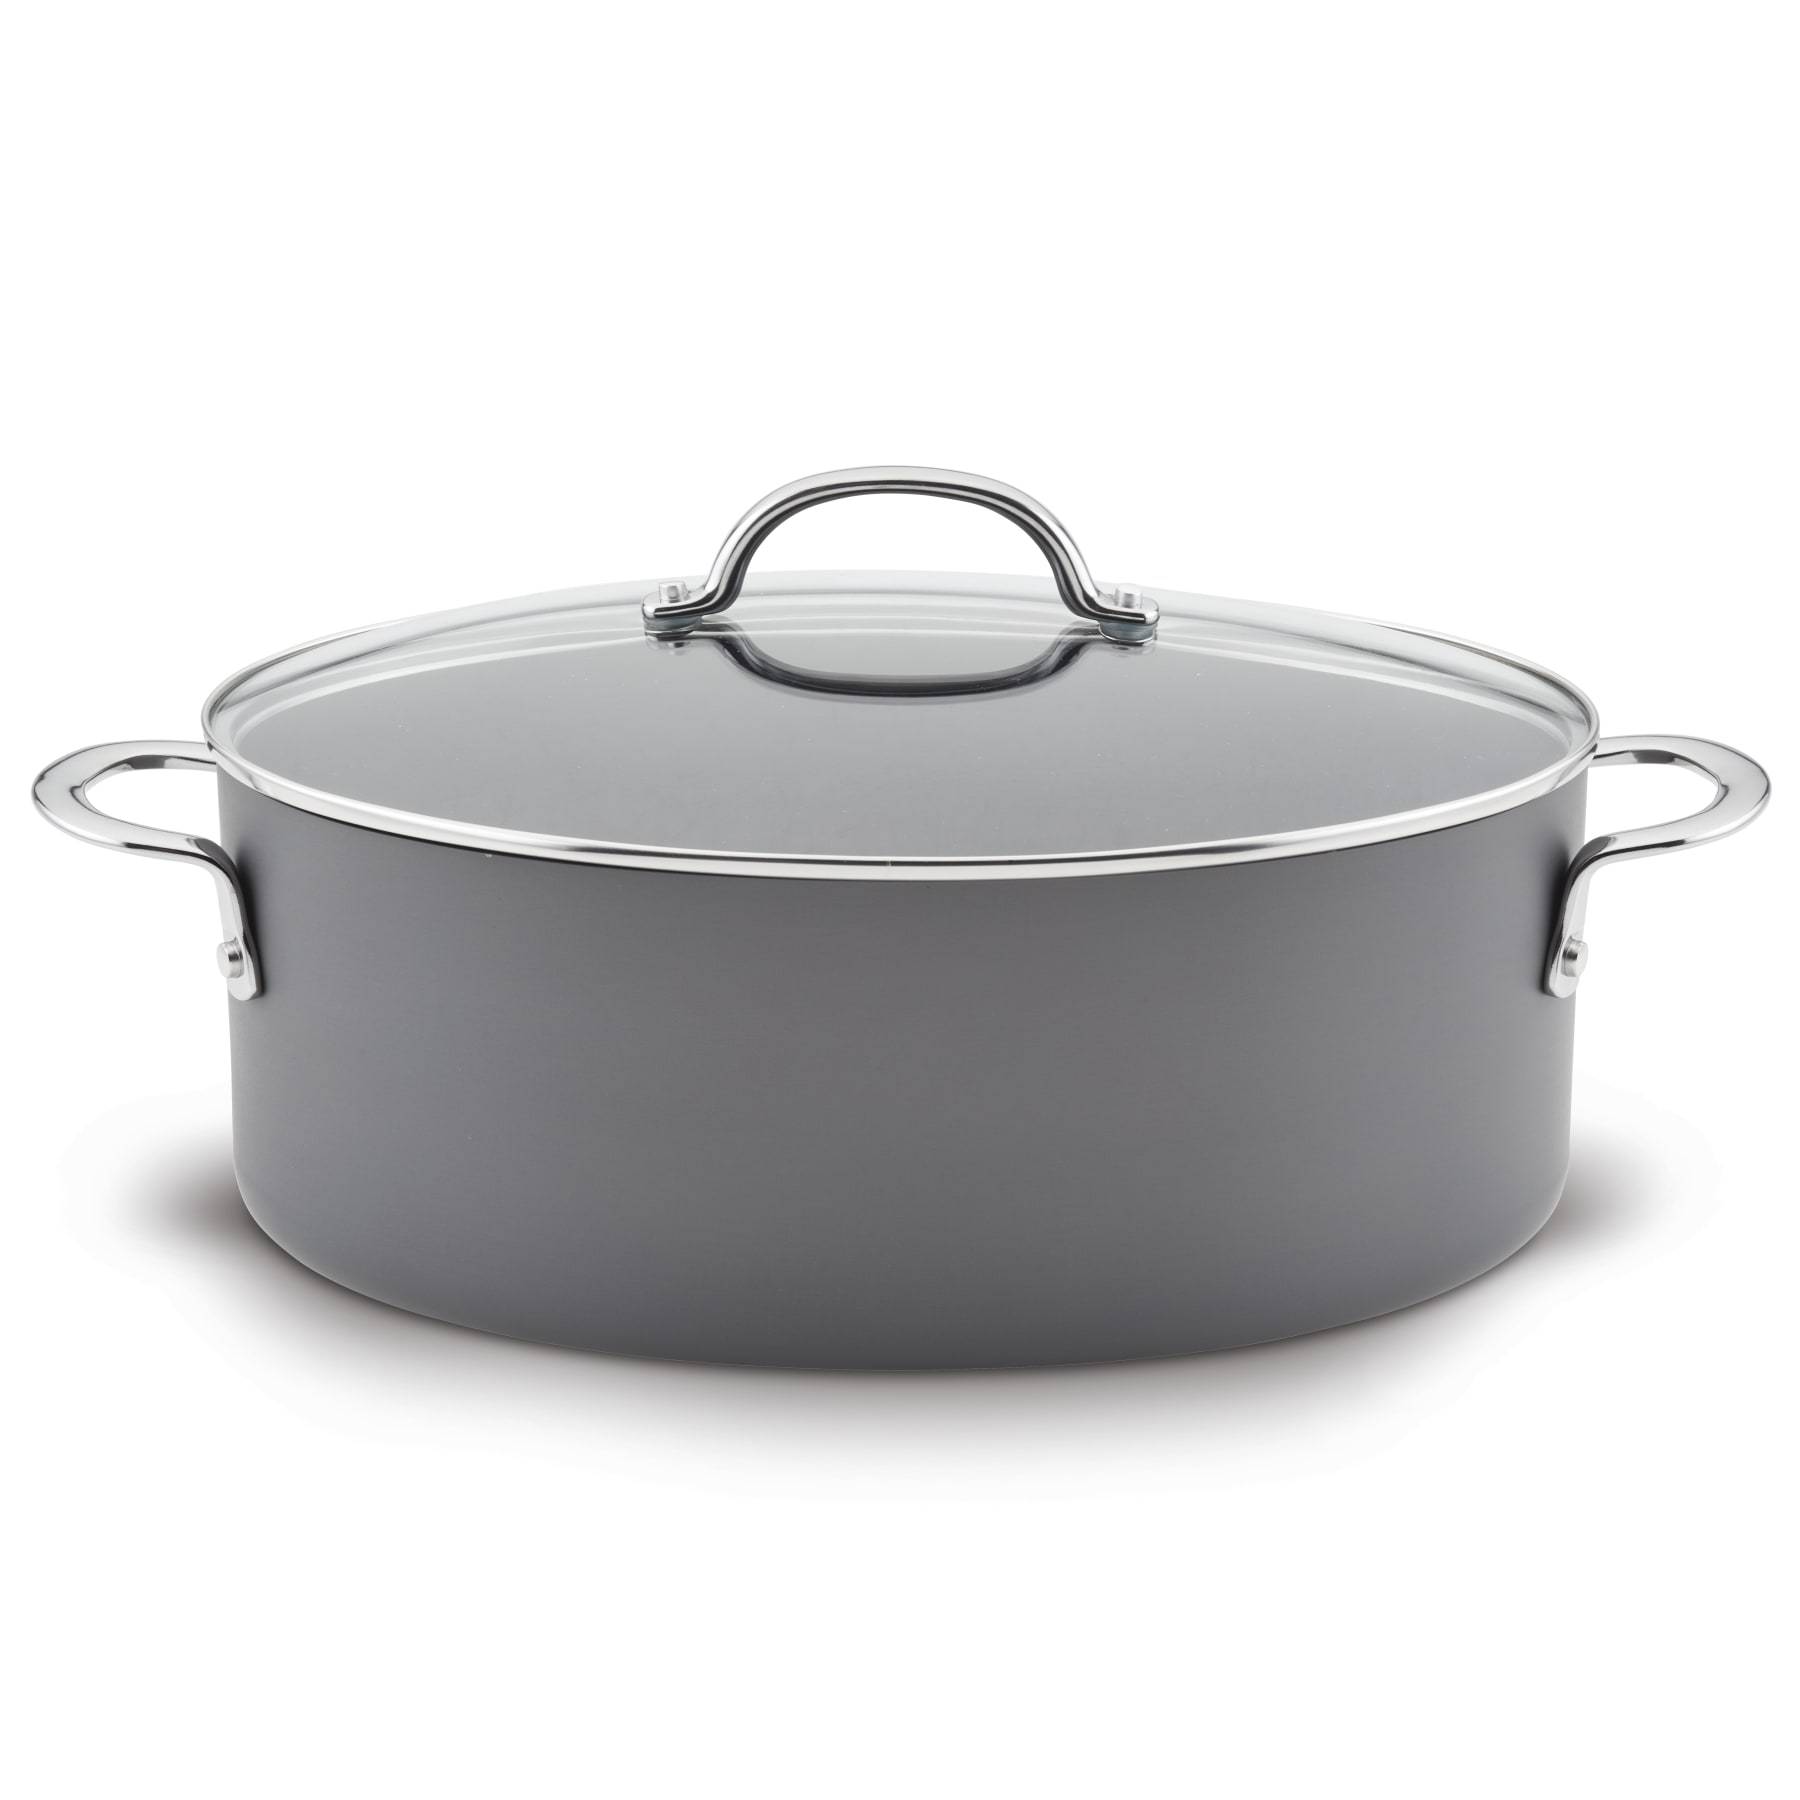 Nonstick Hard Anodized 8-Quart Covered Oval Stockpot